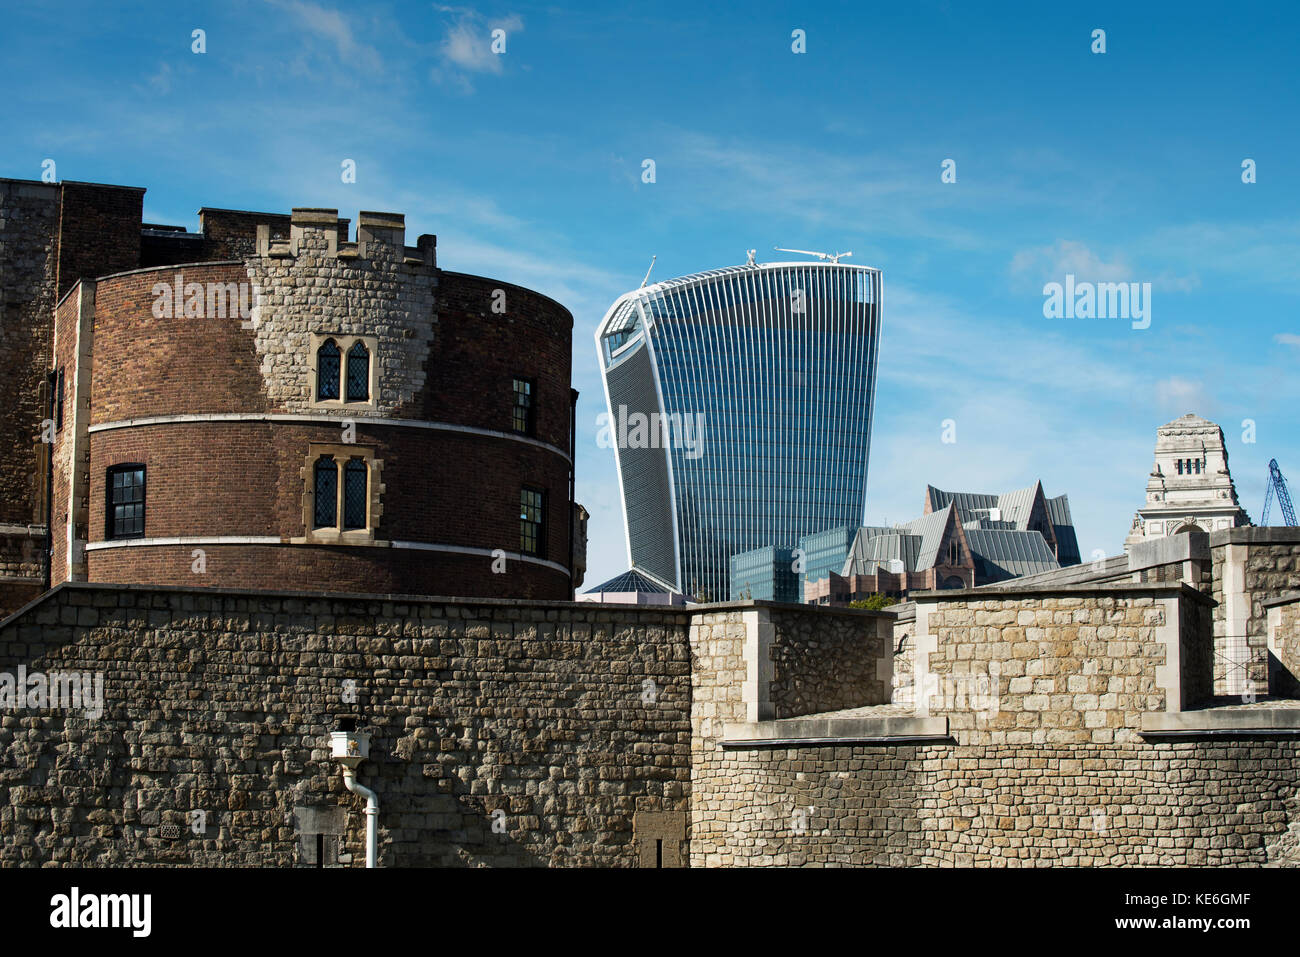 City of London modern buildings contrasting with old buildings photographed from Tower Bridge, London England. Oct 2017 Seen here 20 Fenchurch Street  Stock Photo